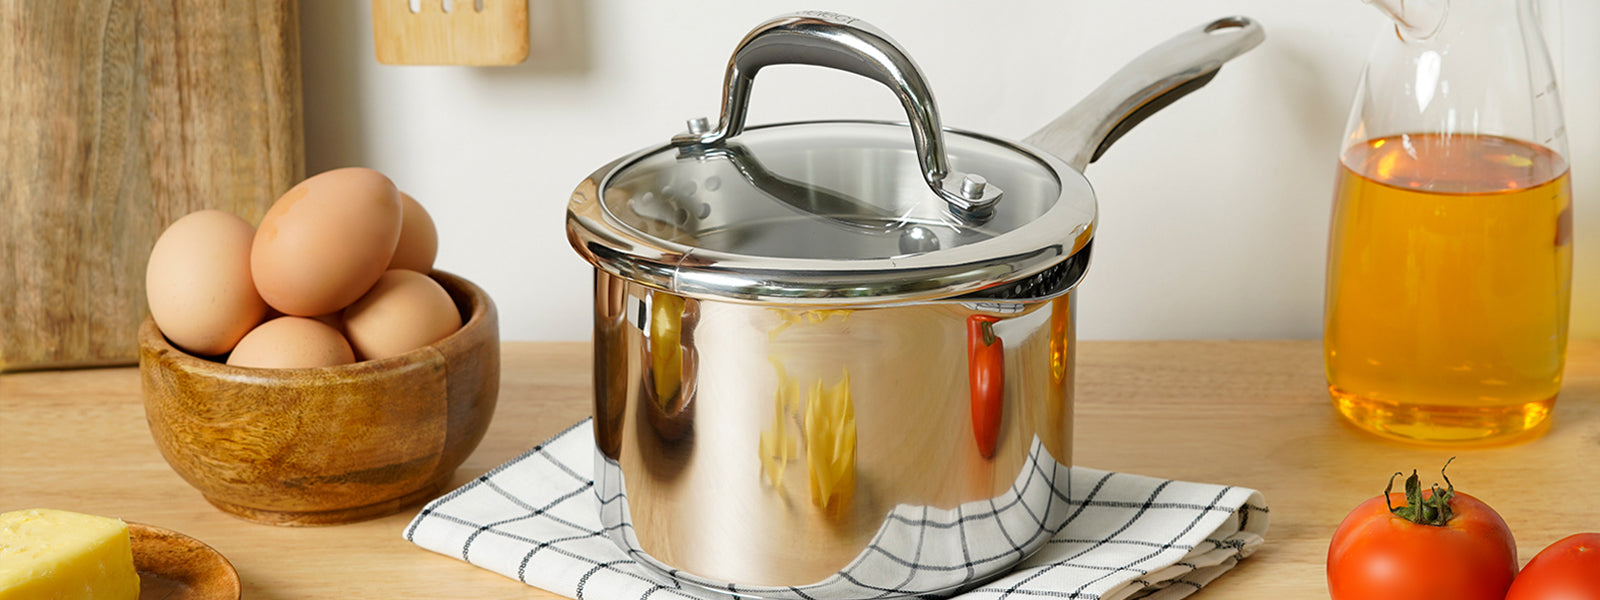 Why Gifting Stainless steel cookware is a great gift choice?